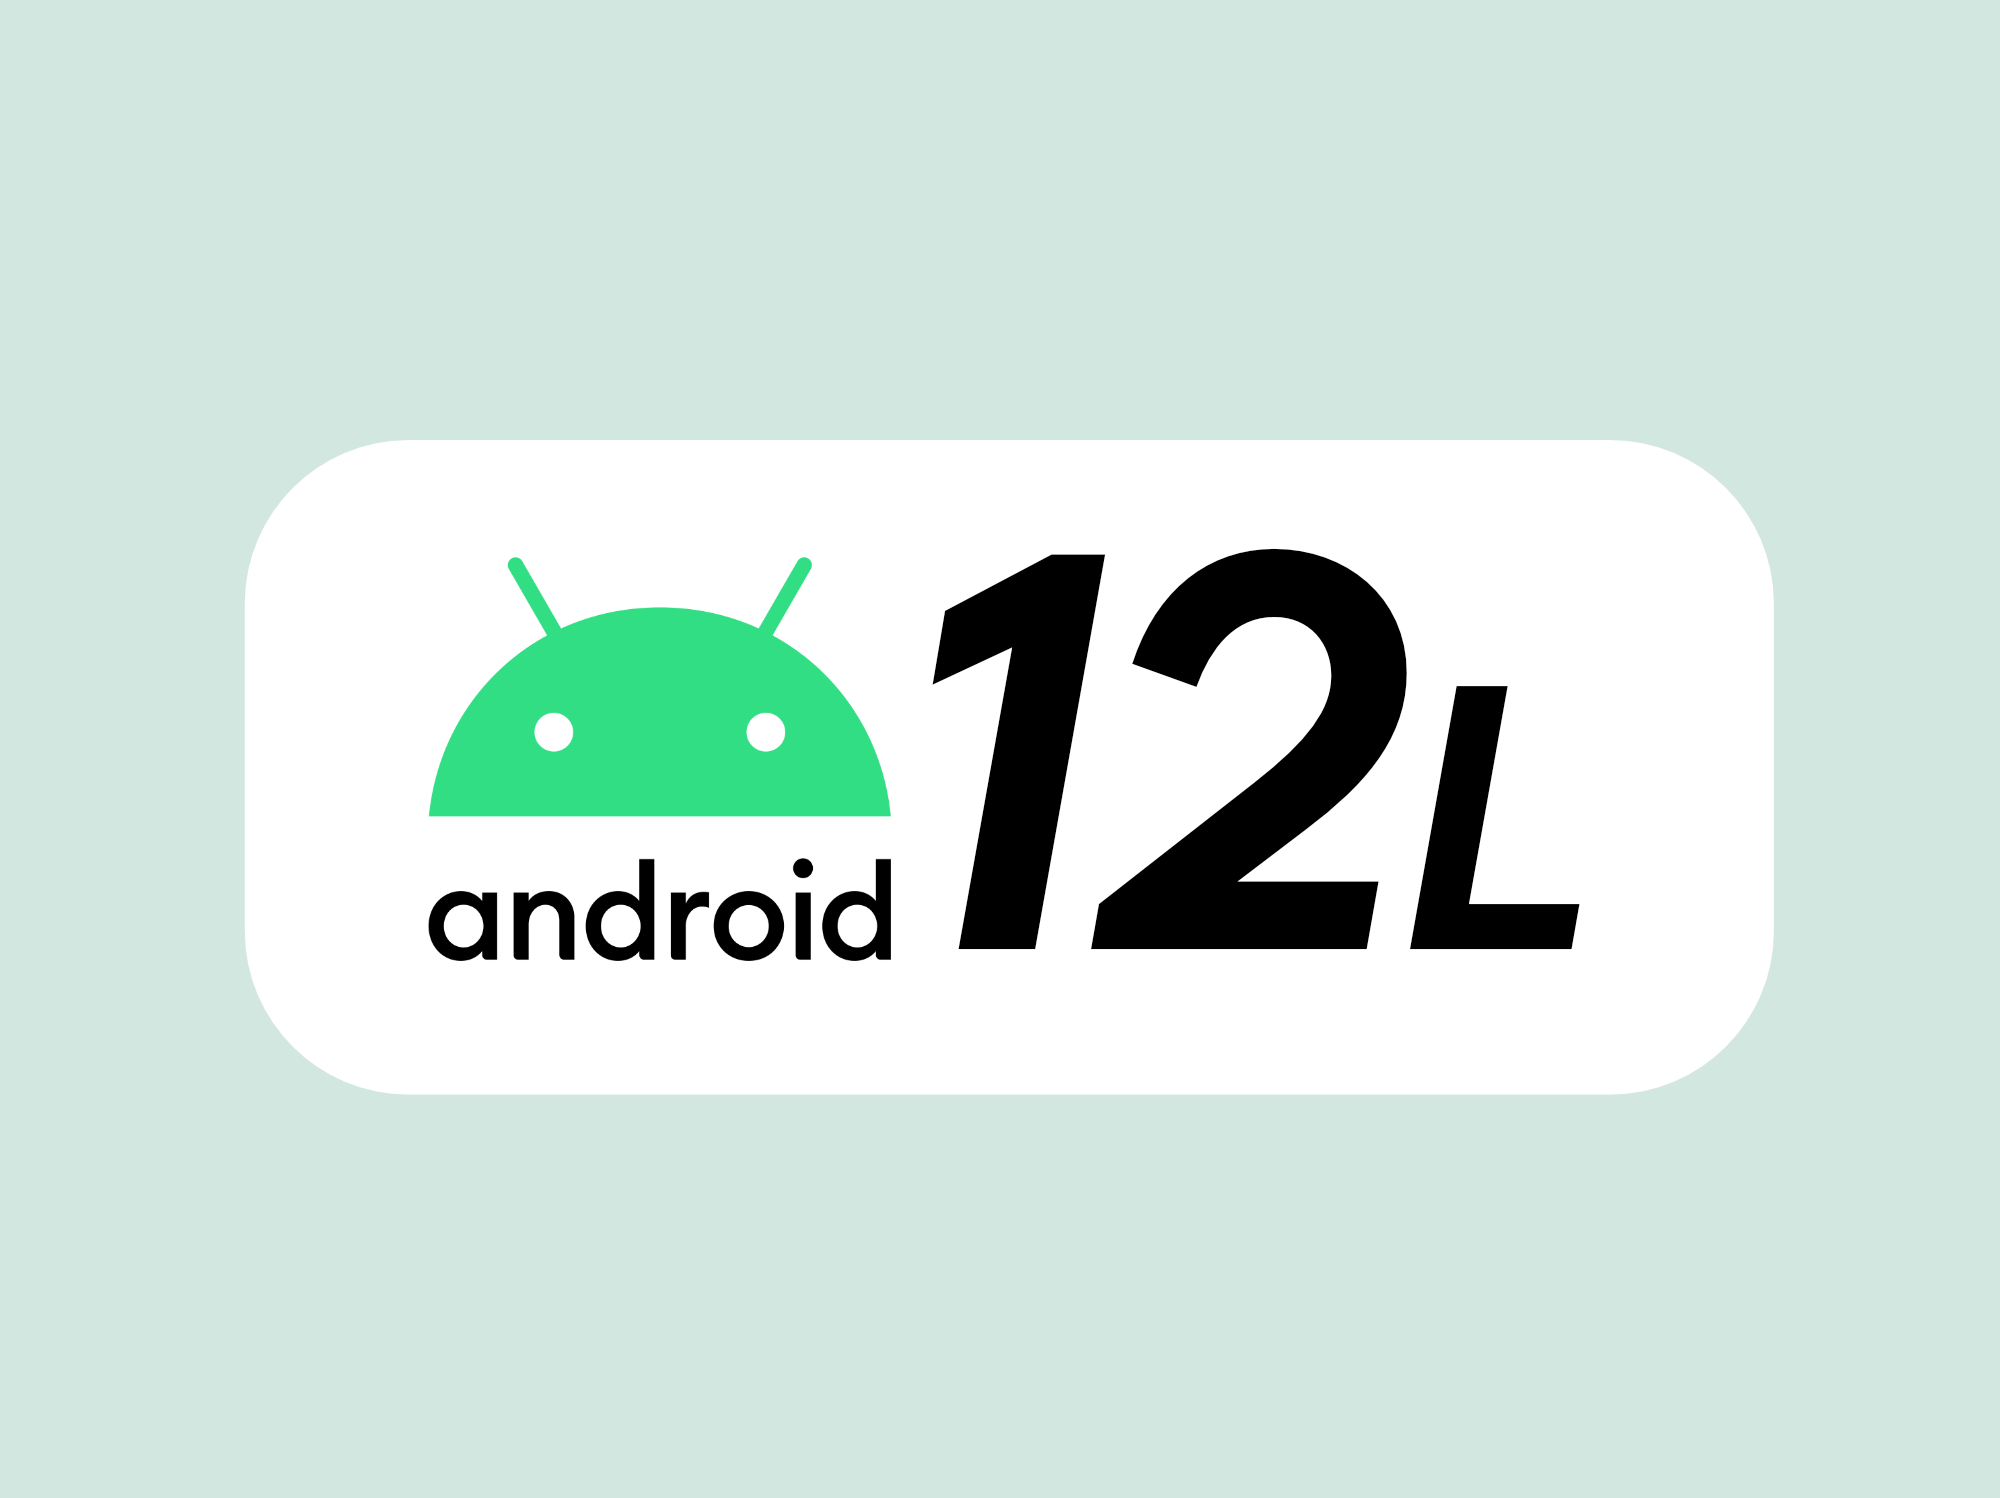 12l android Android 12L